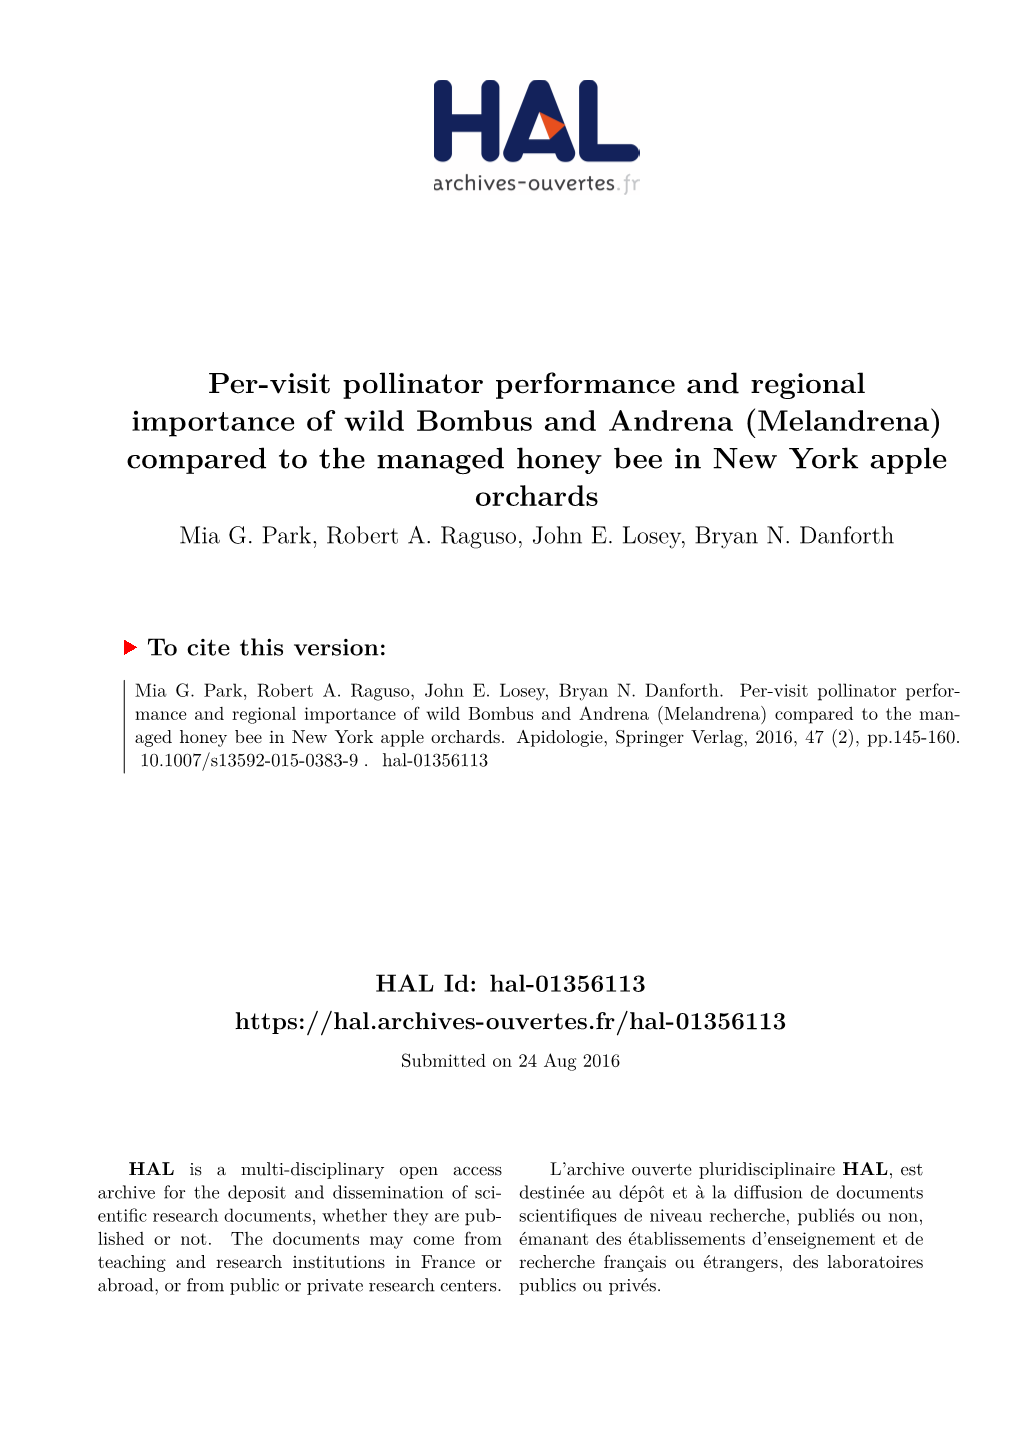 Per-Visit Pollinator Performance and Regional Importance of Wild Bombus and Andrena (Melandrena) Compared to the Managed Honey Bee in New York Apple Orchards Mia G